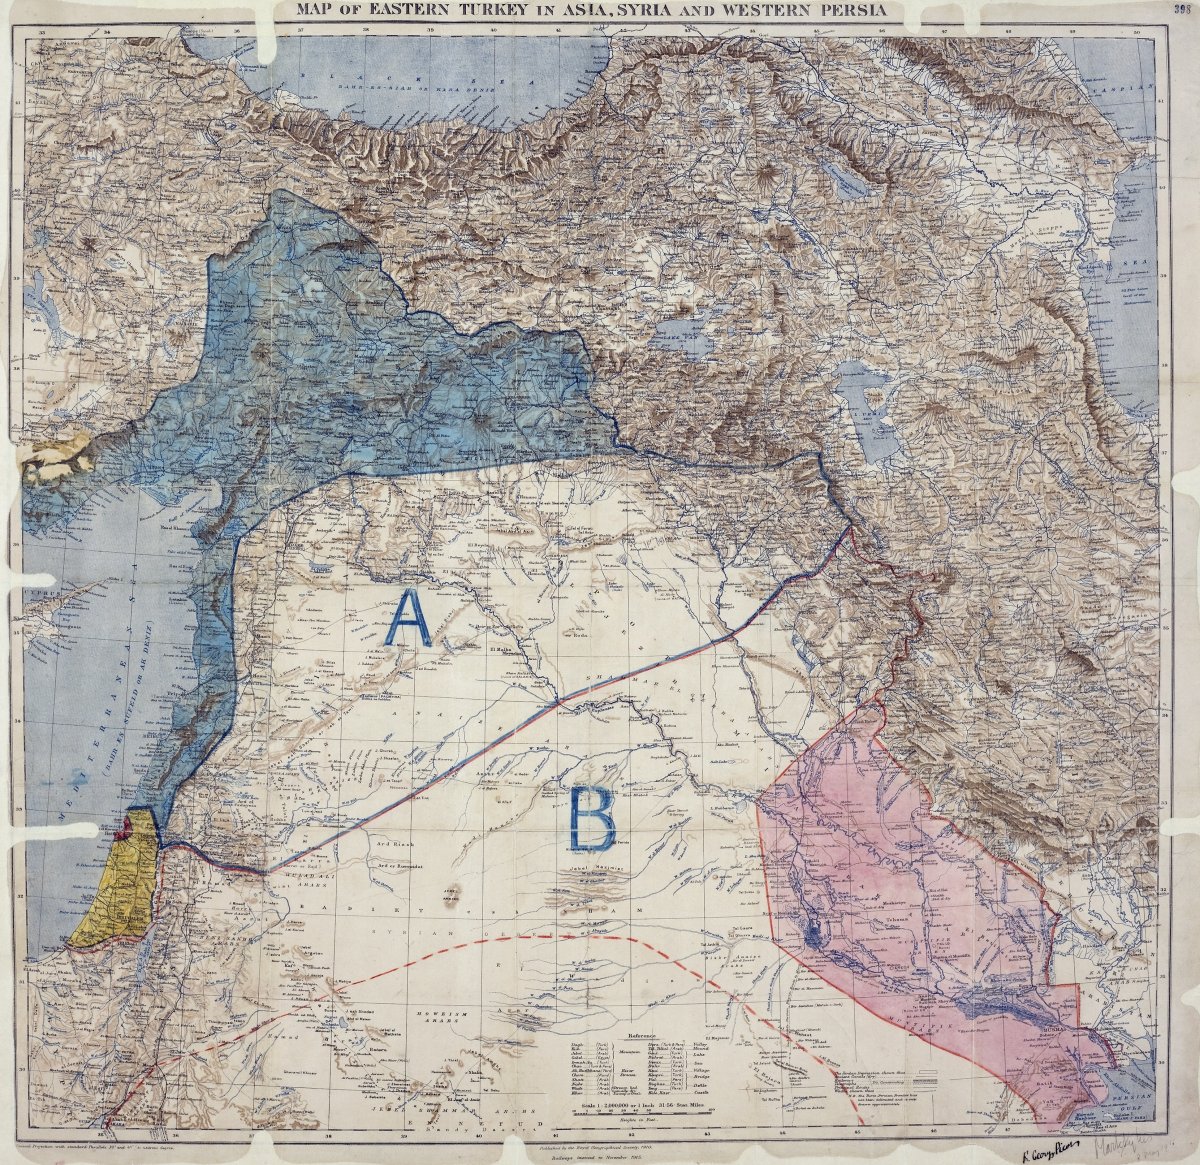 Balfour Declaration of Support for a Jewish Homeland in Palestine